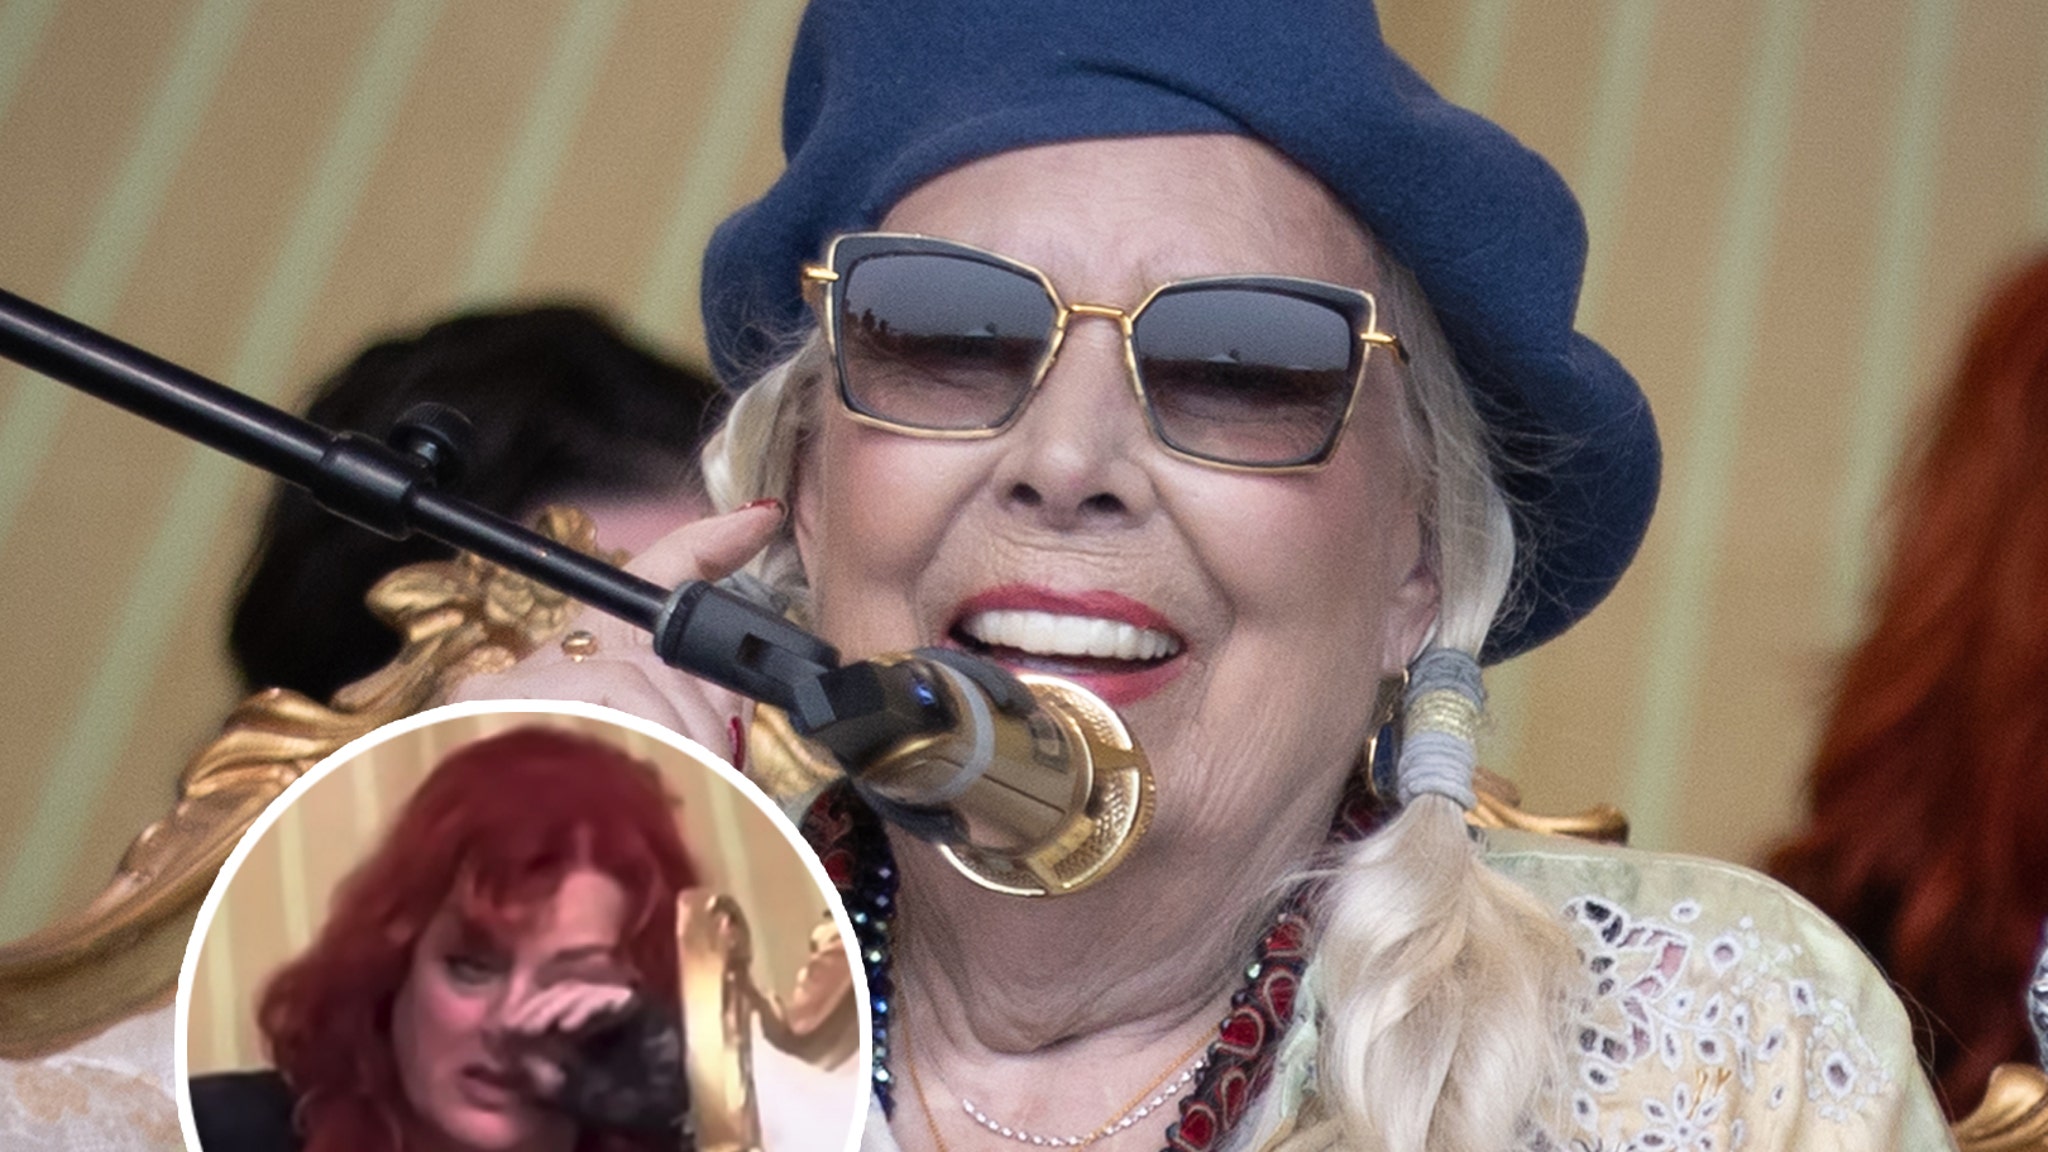 Joni Mitchell Surprises with Emotional First Performance Since 2015 Aneurysm: 'I Didn't Sound Too Bad'